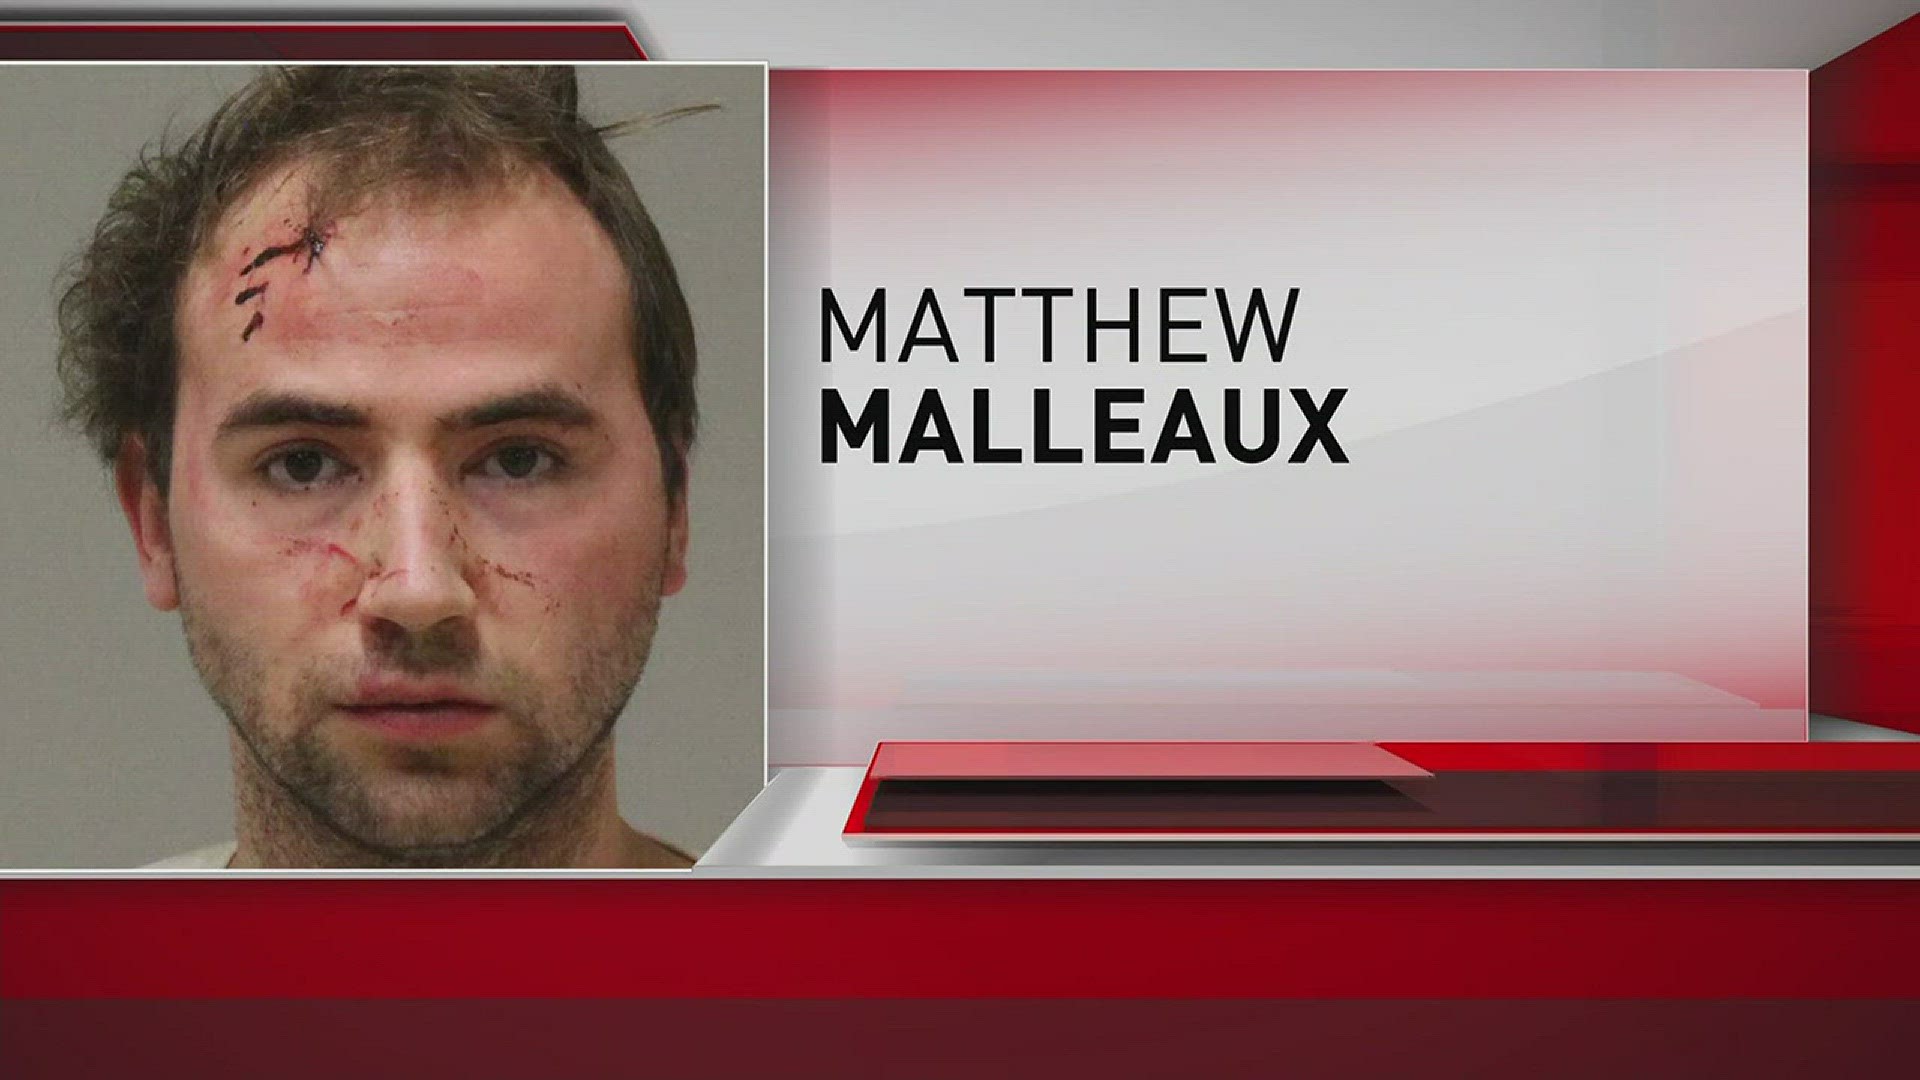 Matthew Malleaux has been charged with open murder in the beating death of his 85-year-old grandmother